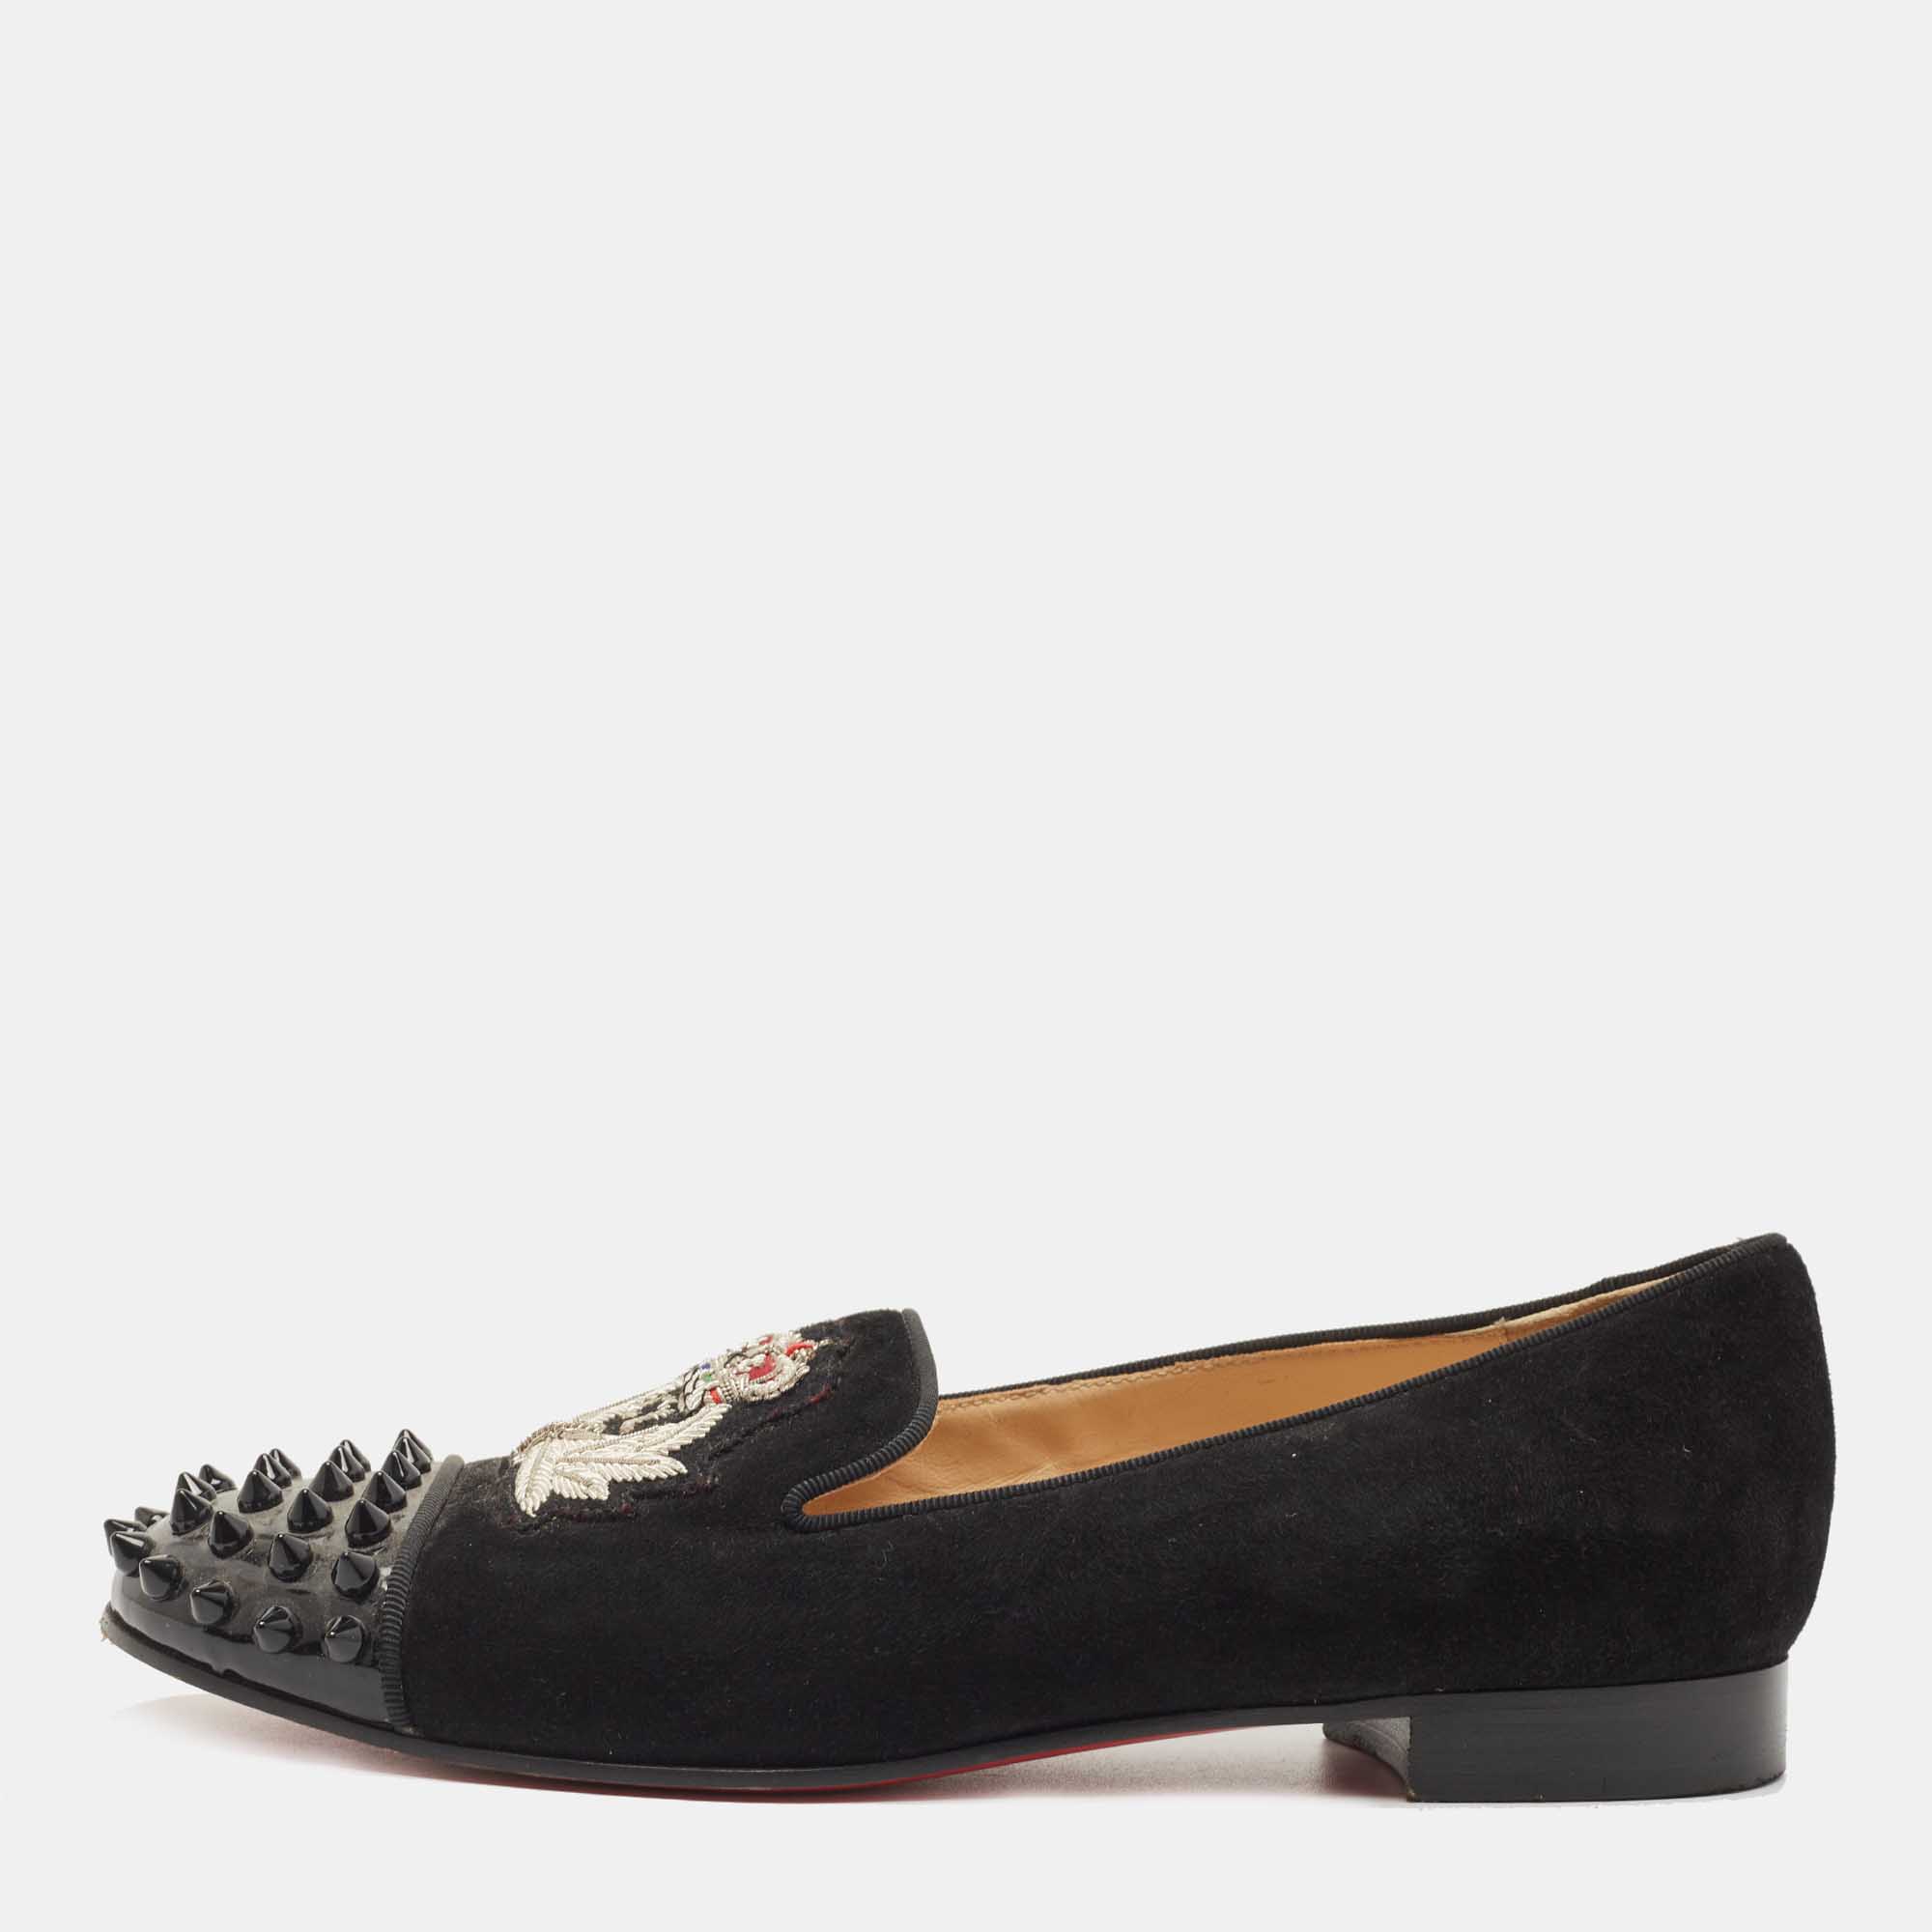 

Christian Louboutin Black Suede Harvanana Spiked Smoking Slippers Size